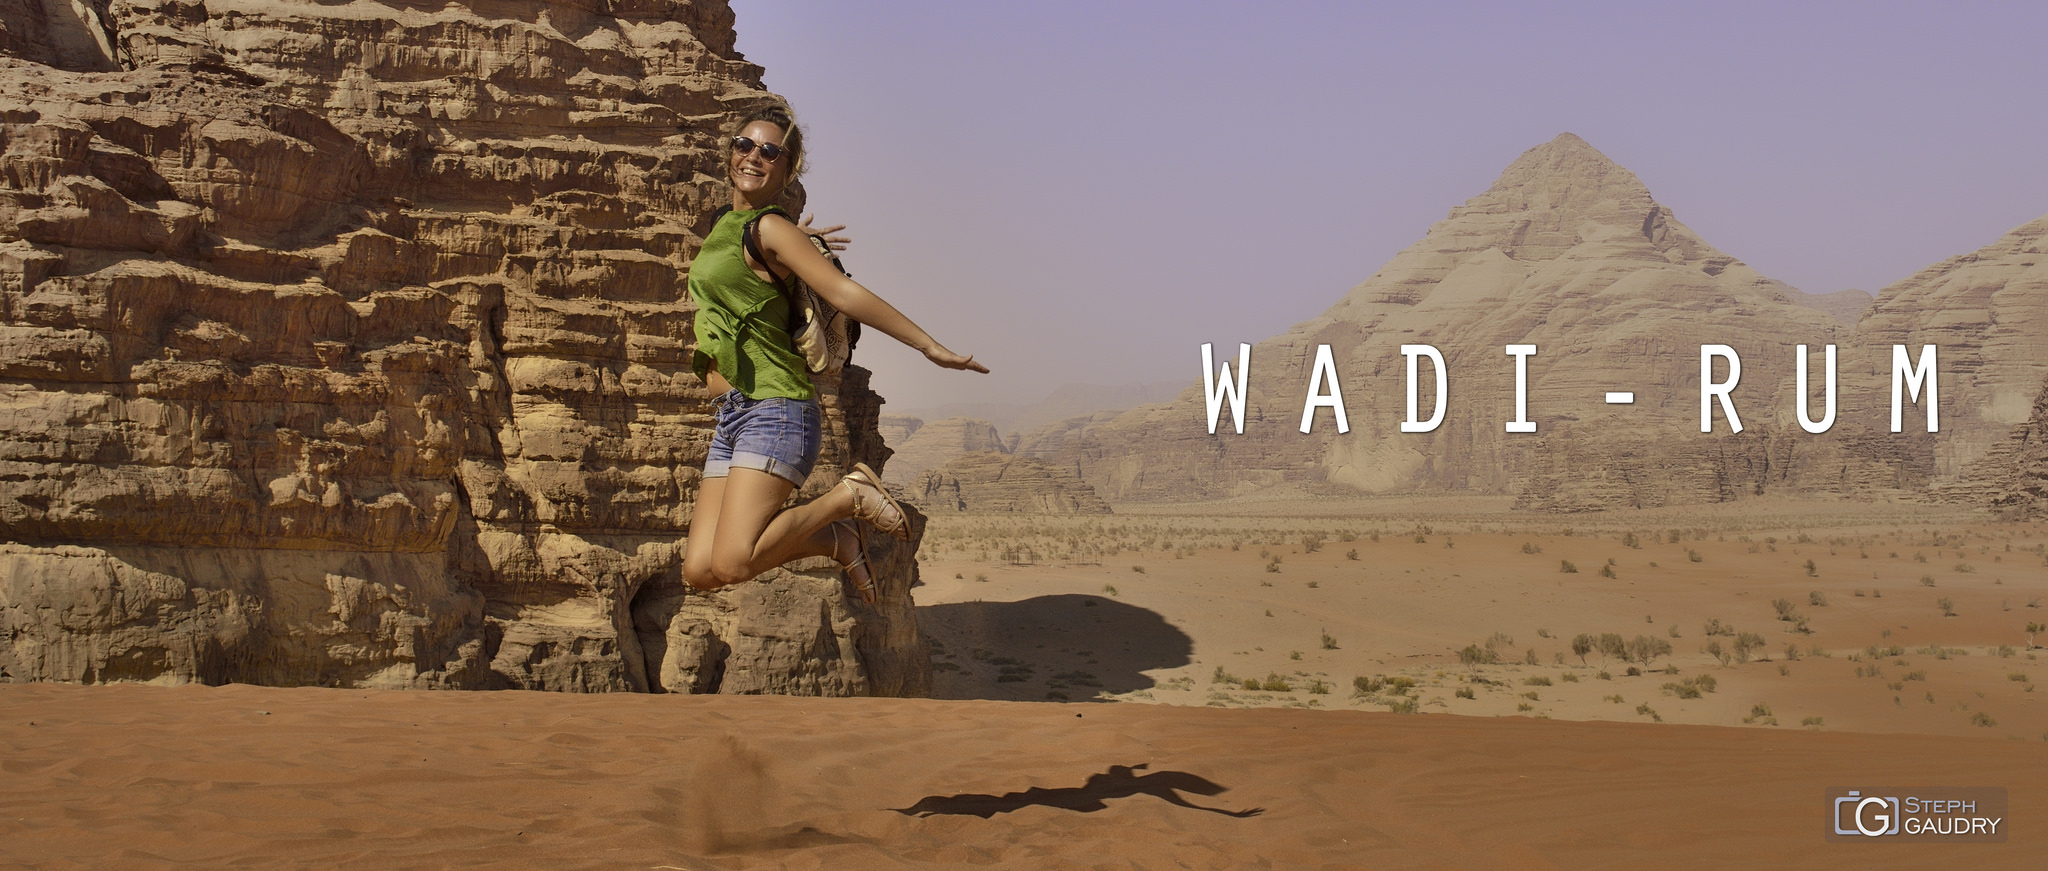 Wadi-Rum - Lucy in the sky with diamonds [Cliquez pour lancer le diaporama]